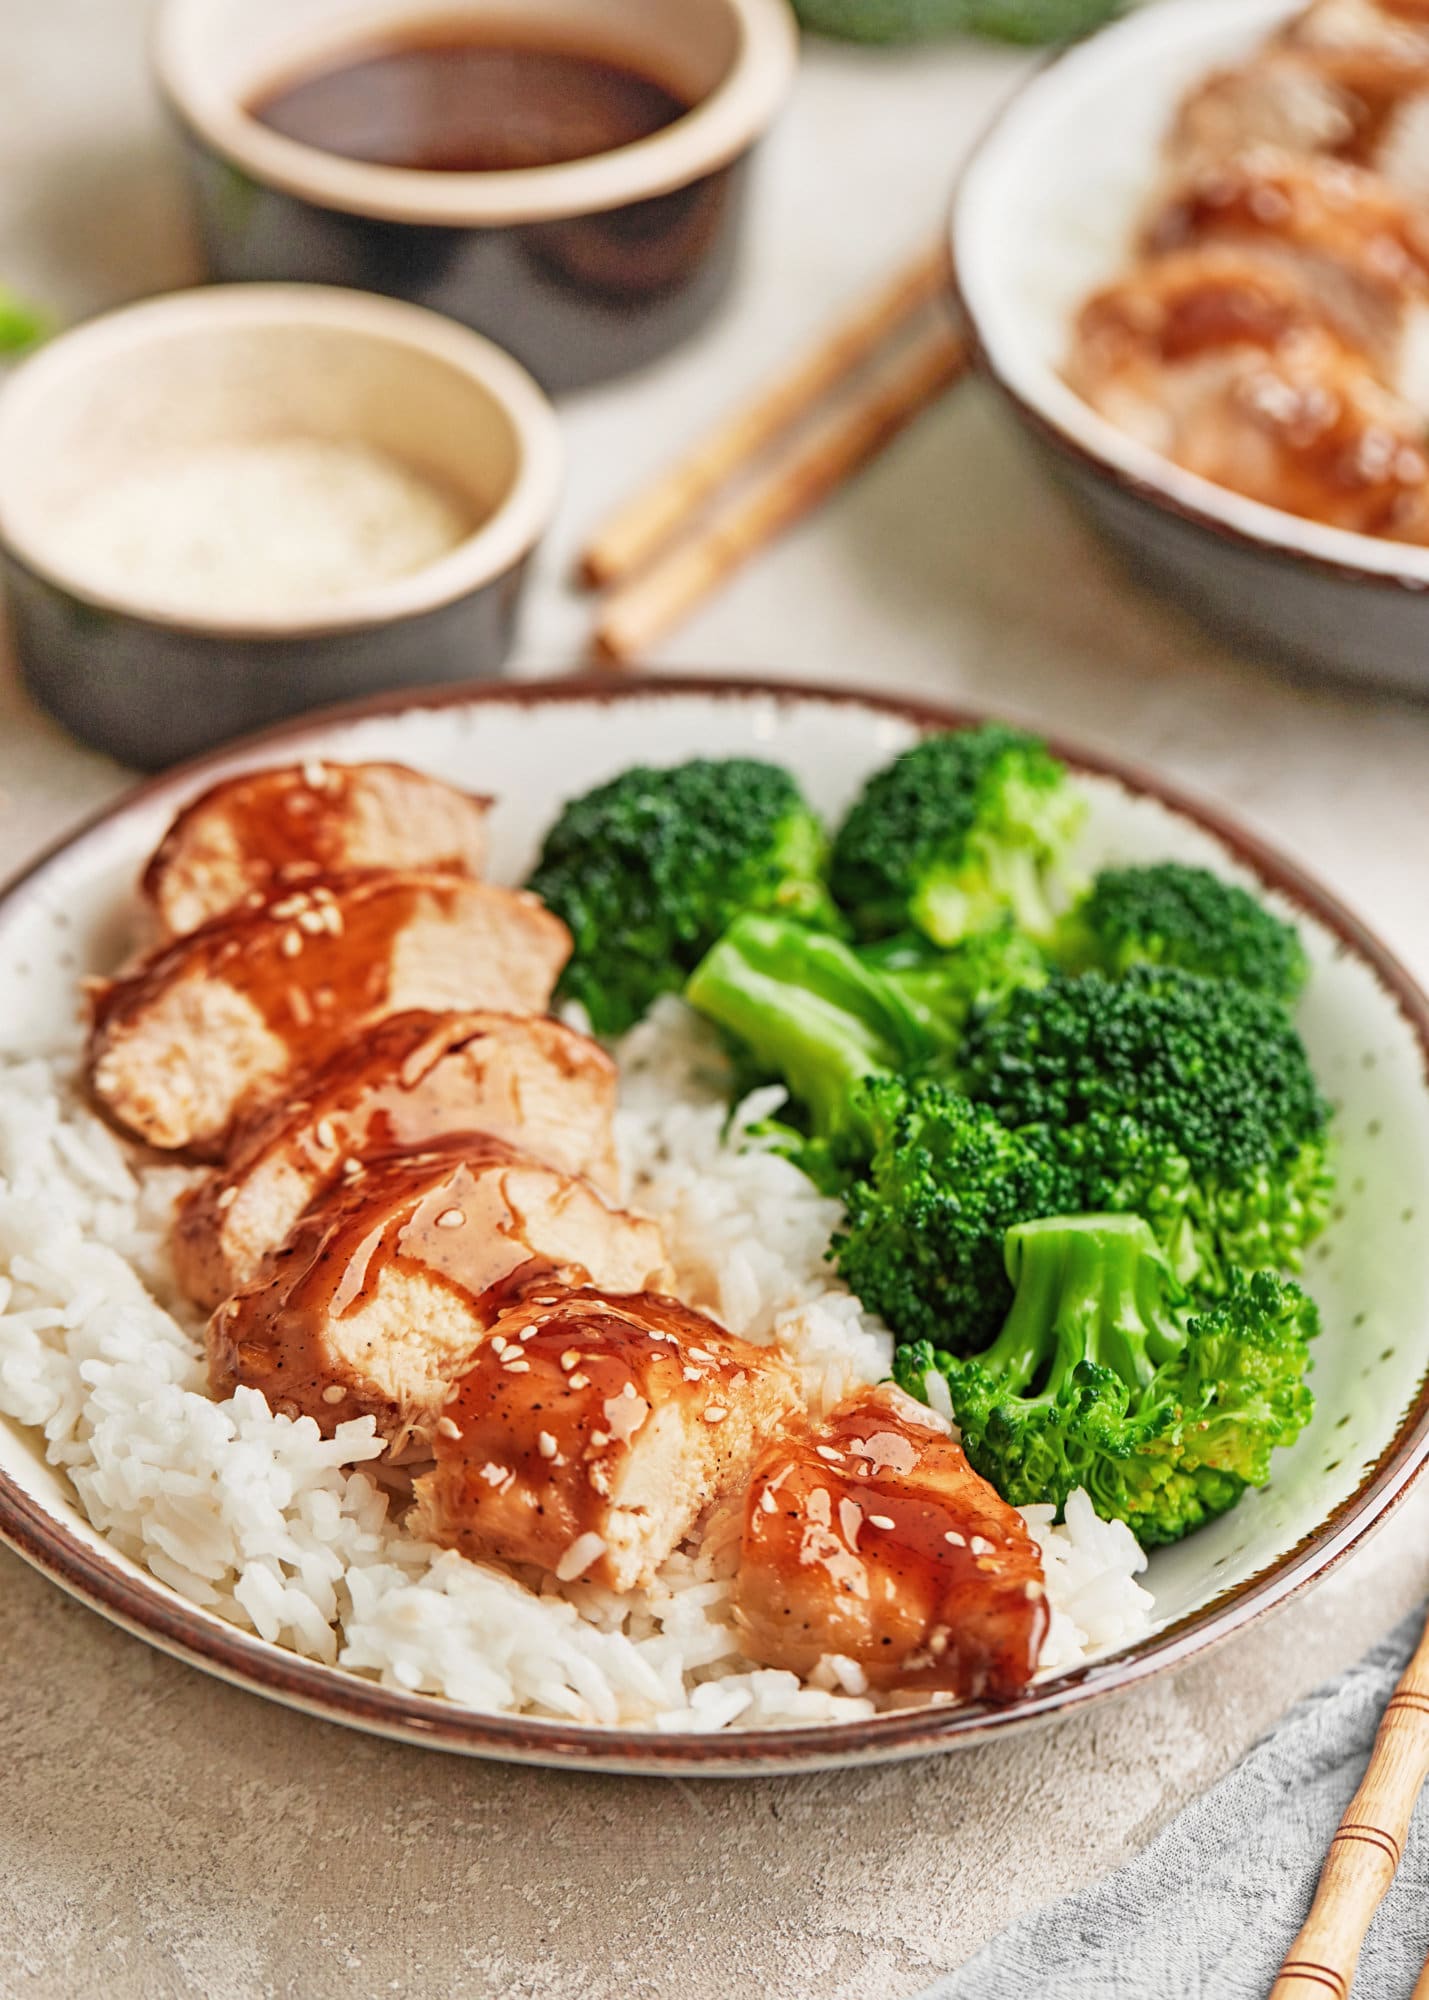 A bowl of sliced teriyaki chicken with broccoli and rice, and chopsticks on the side.